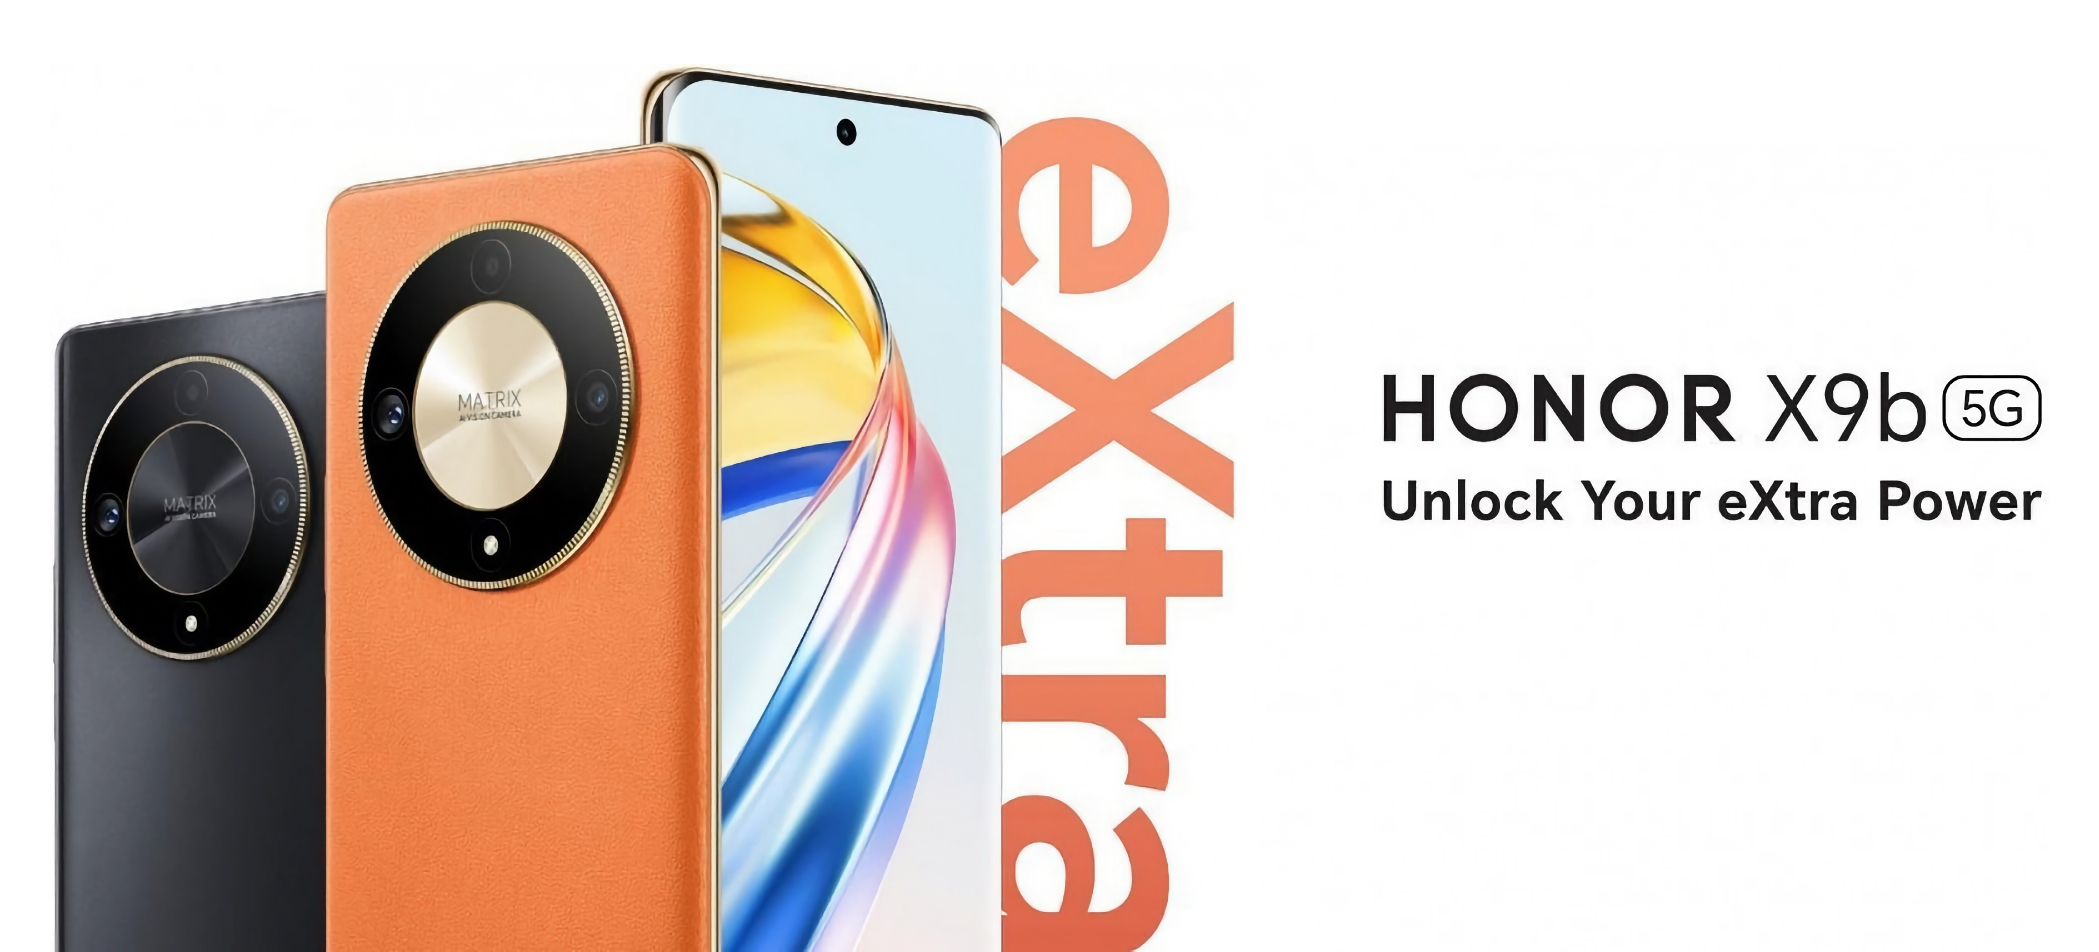 Honor X9b unveiled: smartphone with 120Hz AMOLED screen, Snapdragon 6 Gen 1 chip, 108 MP camera and IP53 protection for $275